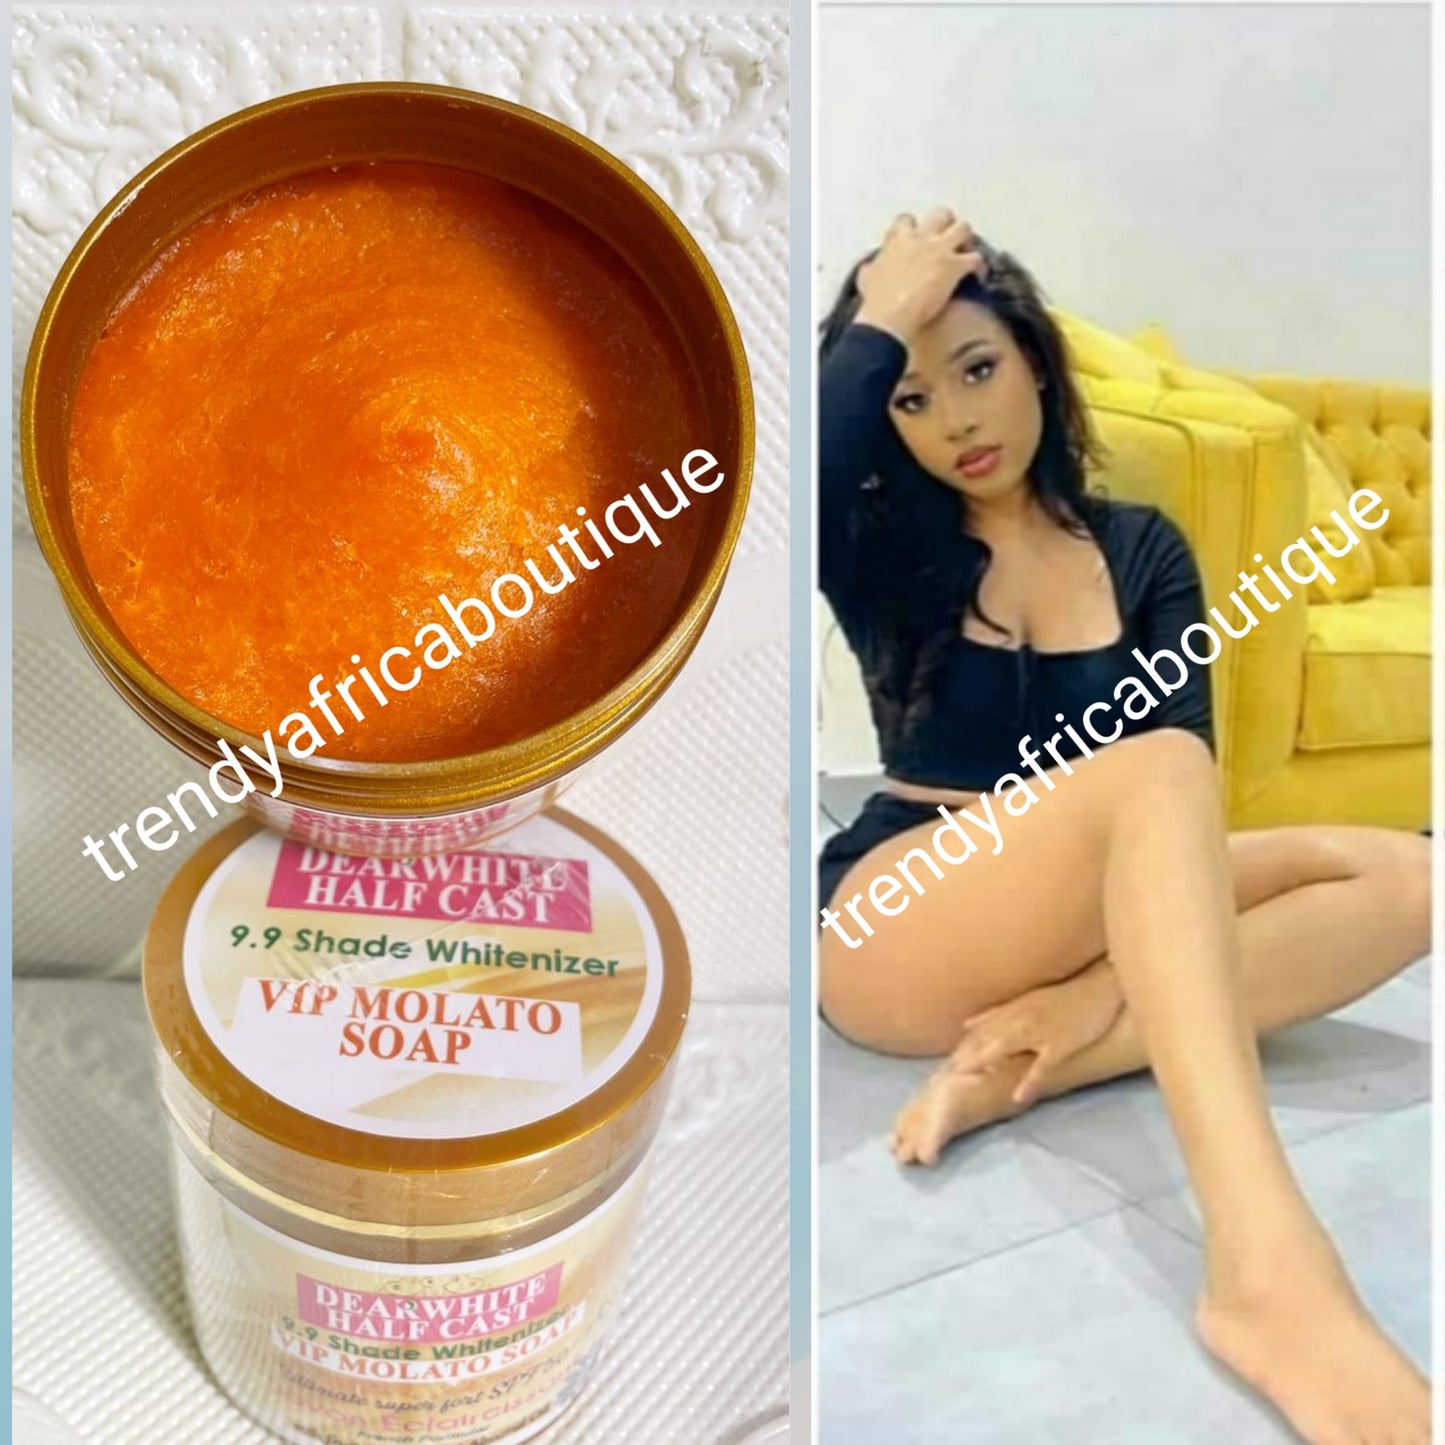 2 in 1 combo deal: Dear White Halfcast 9.9 shades Whitenizer body lotion 500ml plus VIP  3in1 MOLATO soap 500g x1. French formular with fruit acid and almond oil..